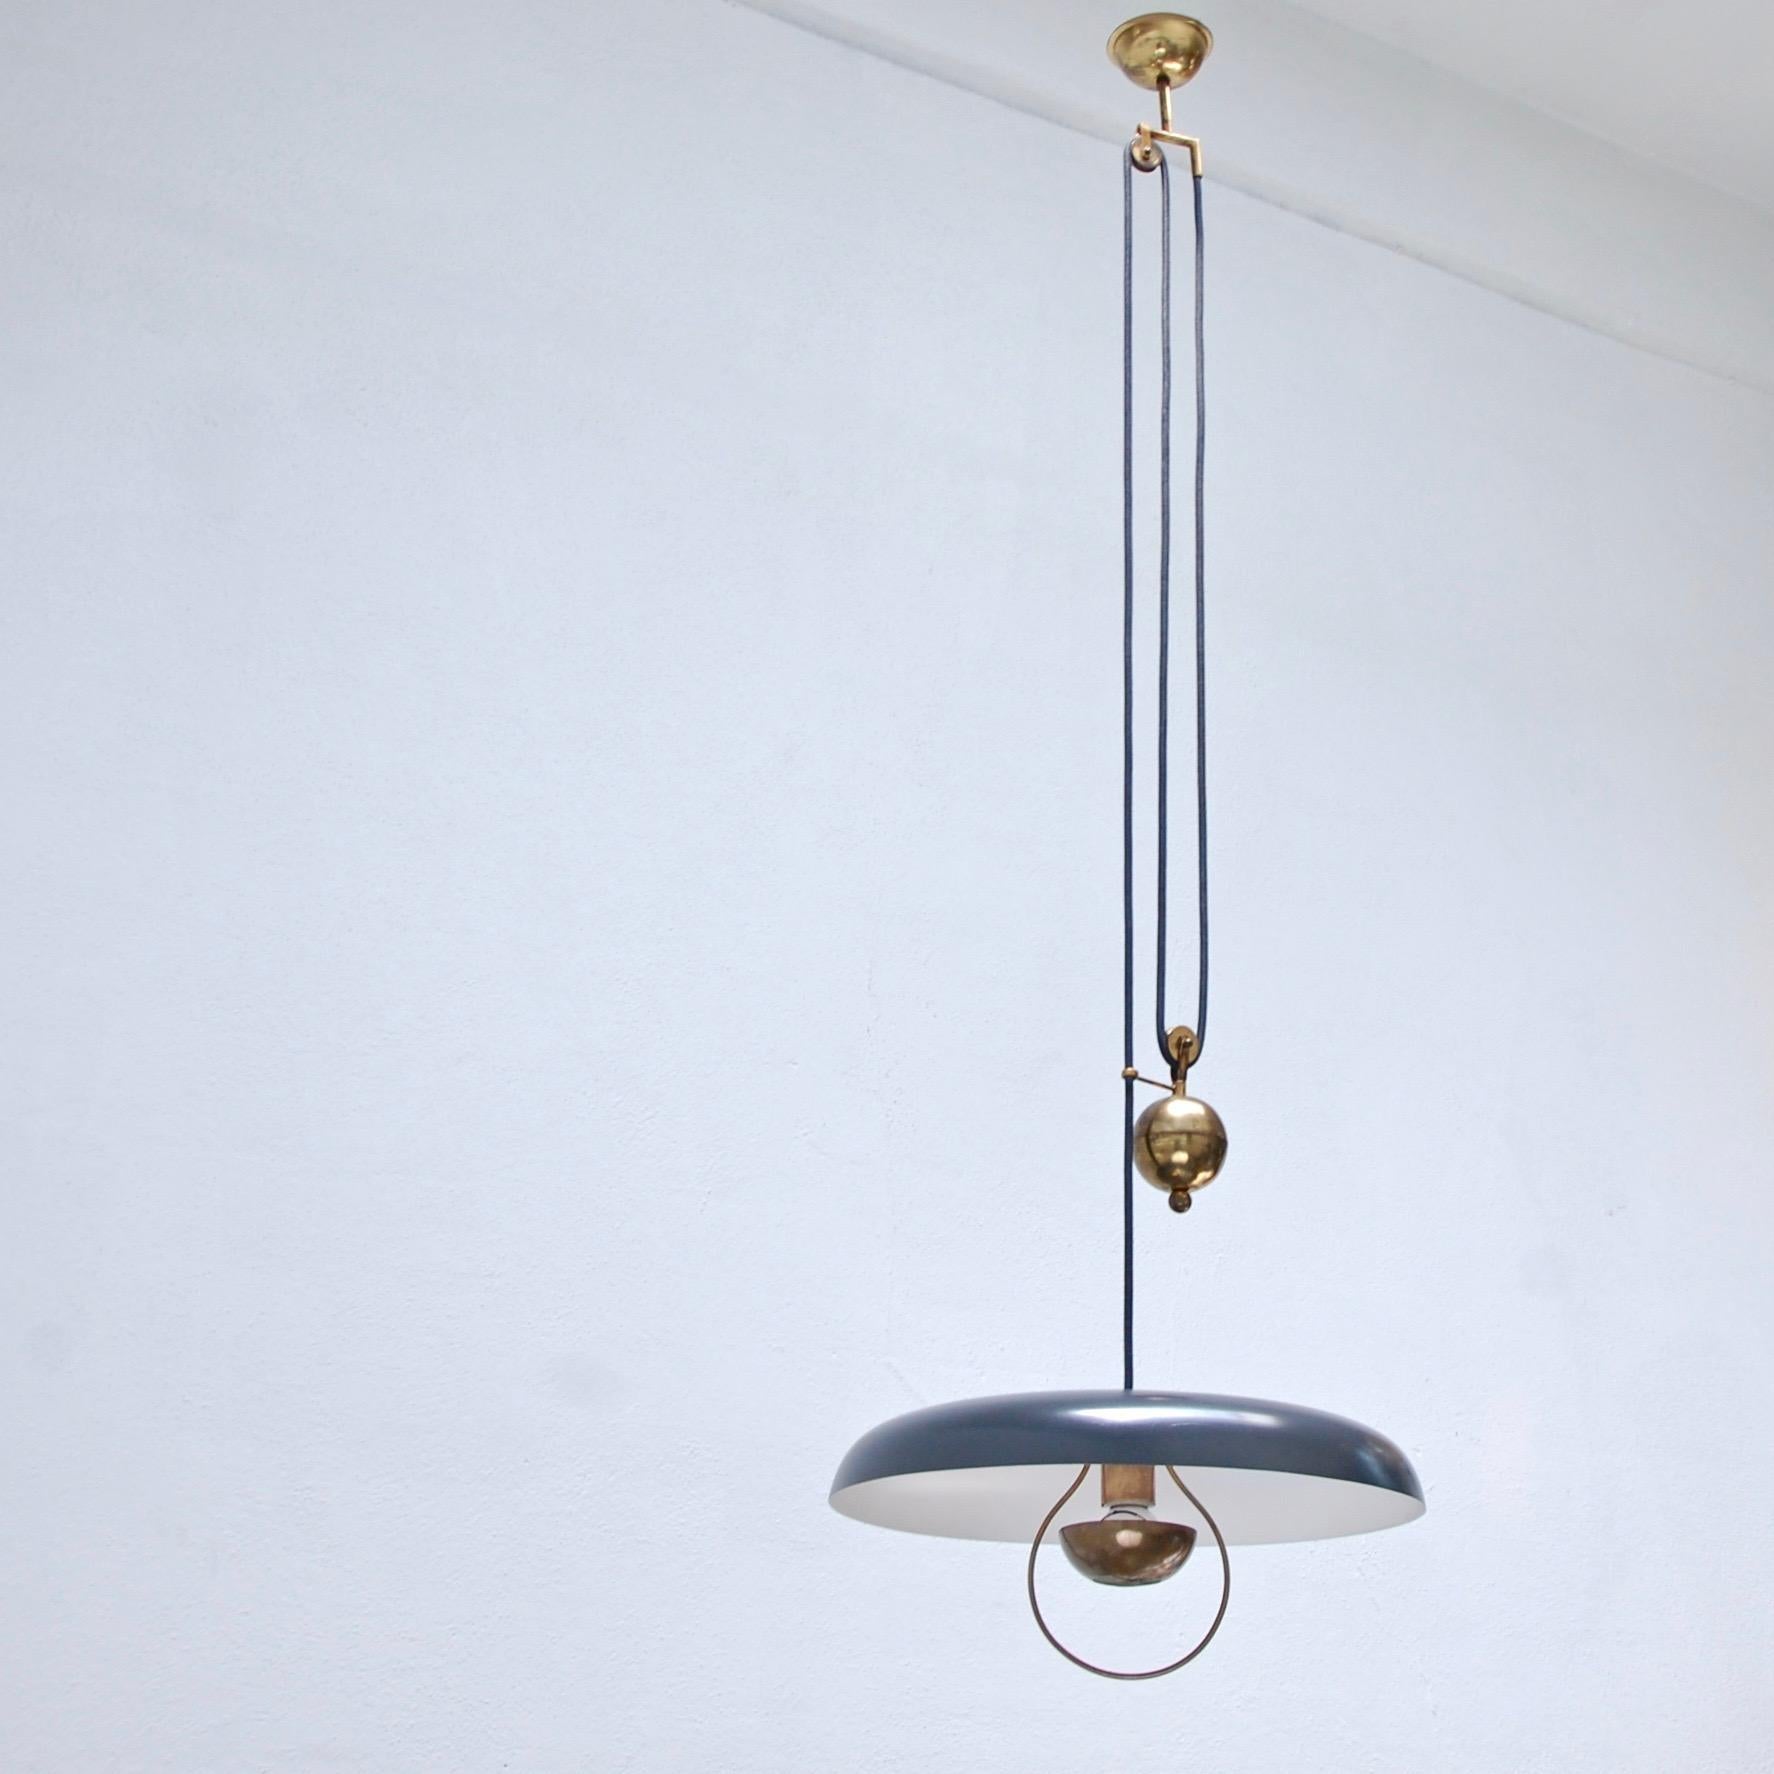 Italian late 1940s adjustable pulley pendant in naturally aged brass and painted aluminum. Partially restored. Height is adjustable due to pulley feature. Light bulb included with order. 
Measurements:
Fixture height: 8”
Diameter: 18”
OAD: